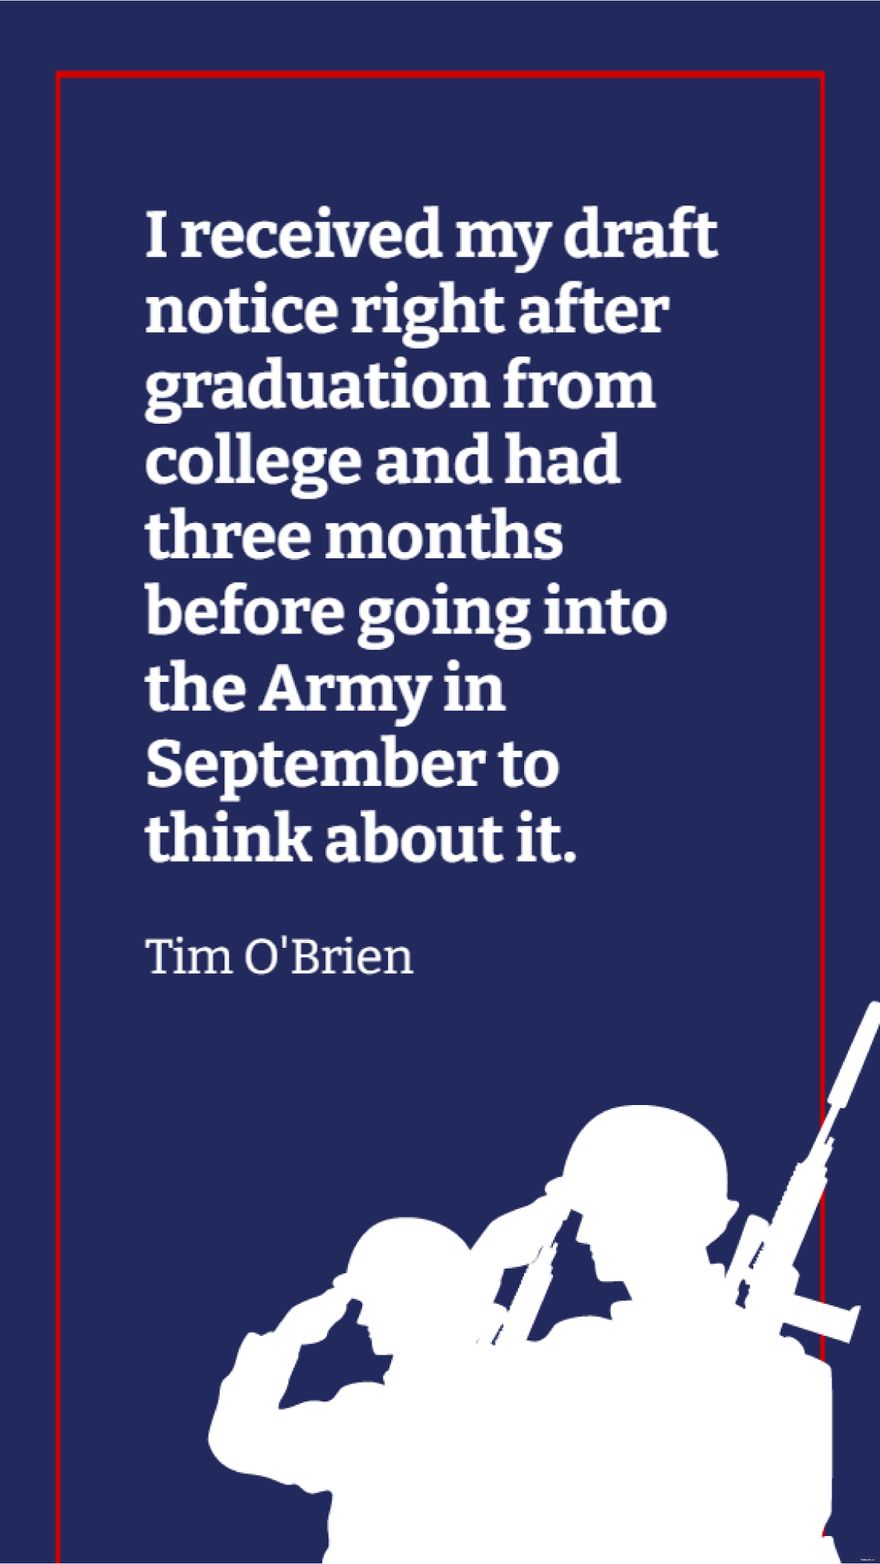 Free Tim O'Brien - I received my draft notice right after graduation from college and had three months before going into the Army in September to think about it. in JPG